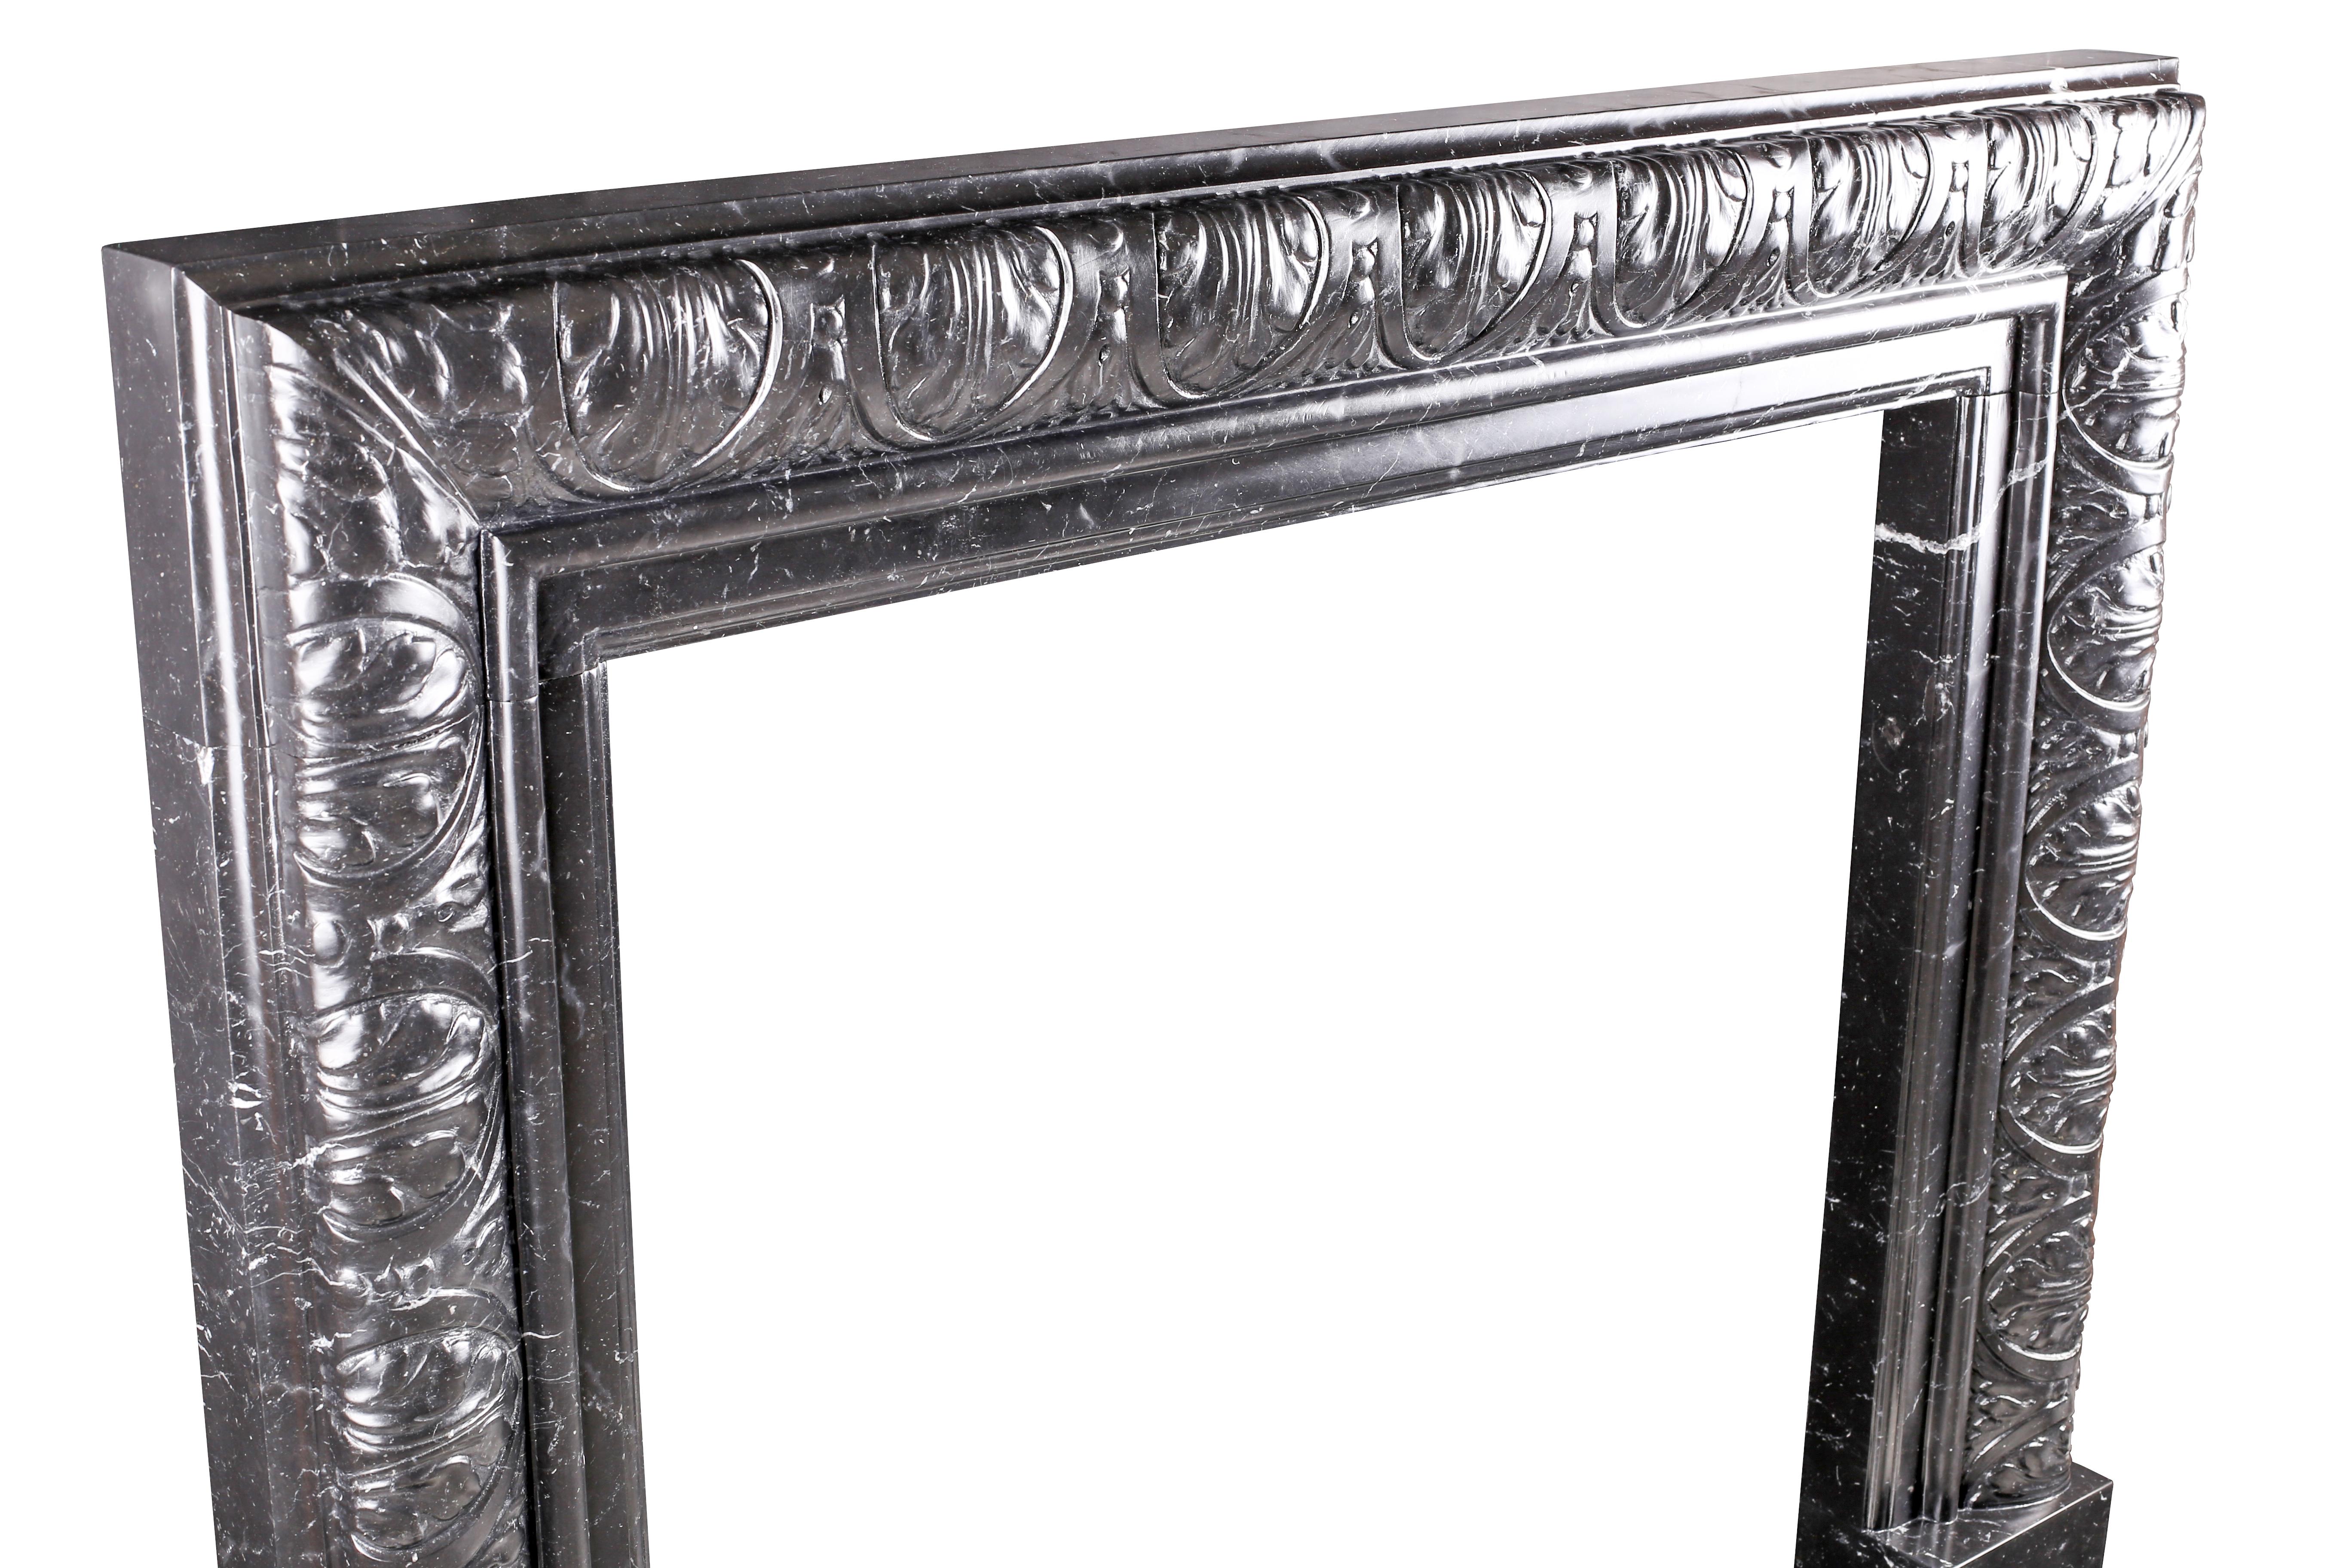 Elegant Regency Baroque Carved Bolection Fireplace Surround Nero Marquina Marble In New Condition For Sale In London, GB